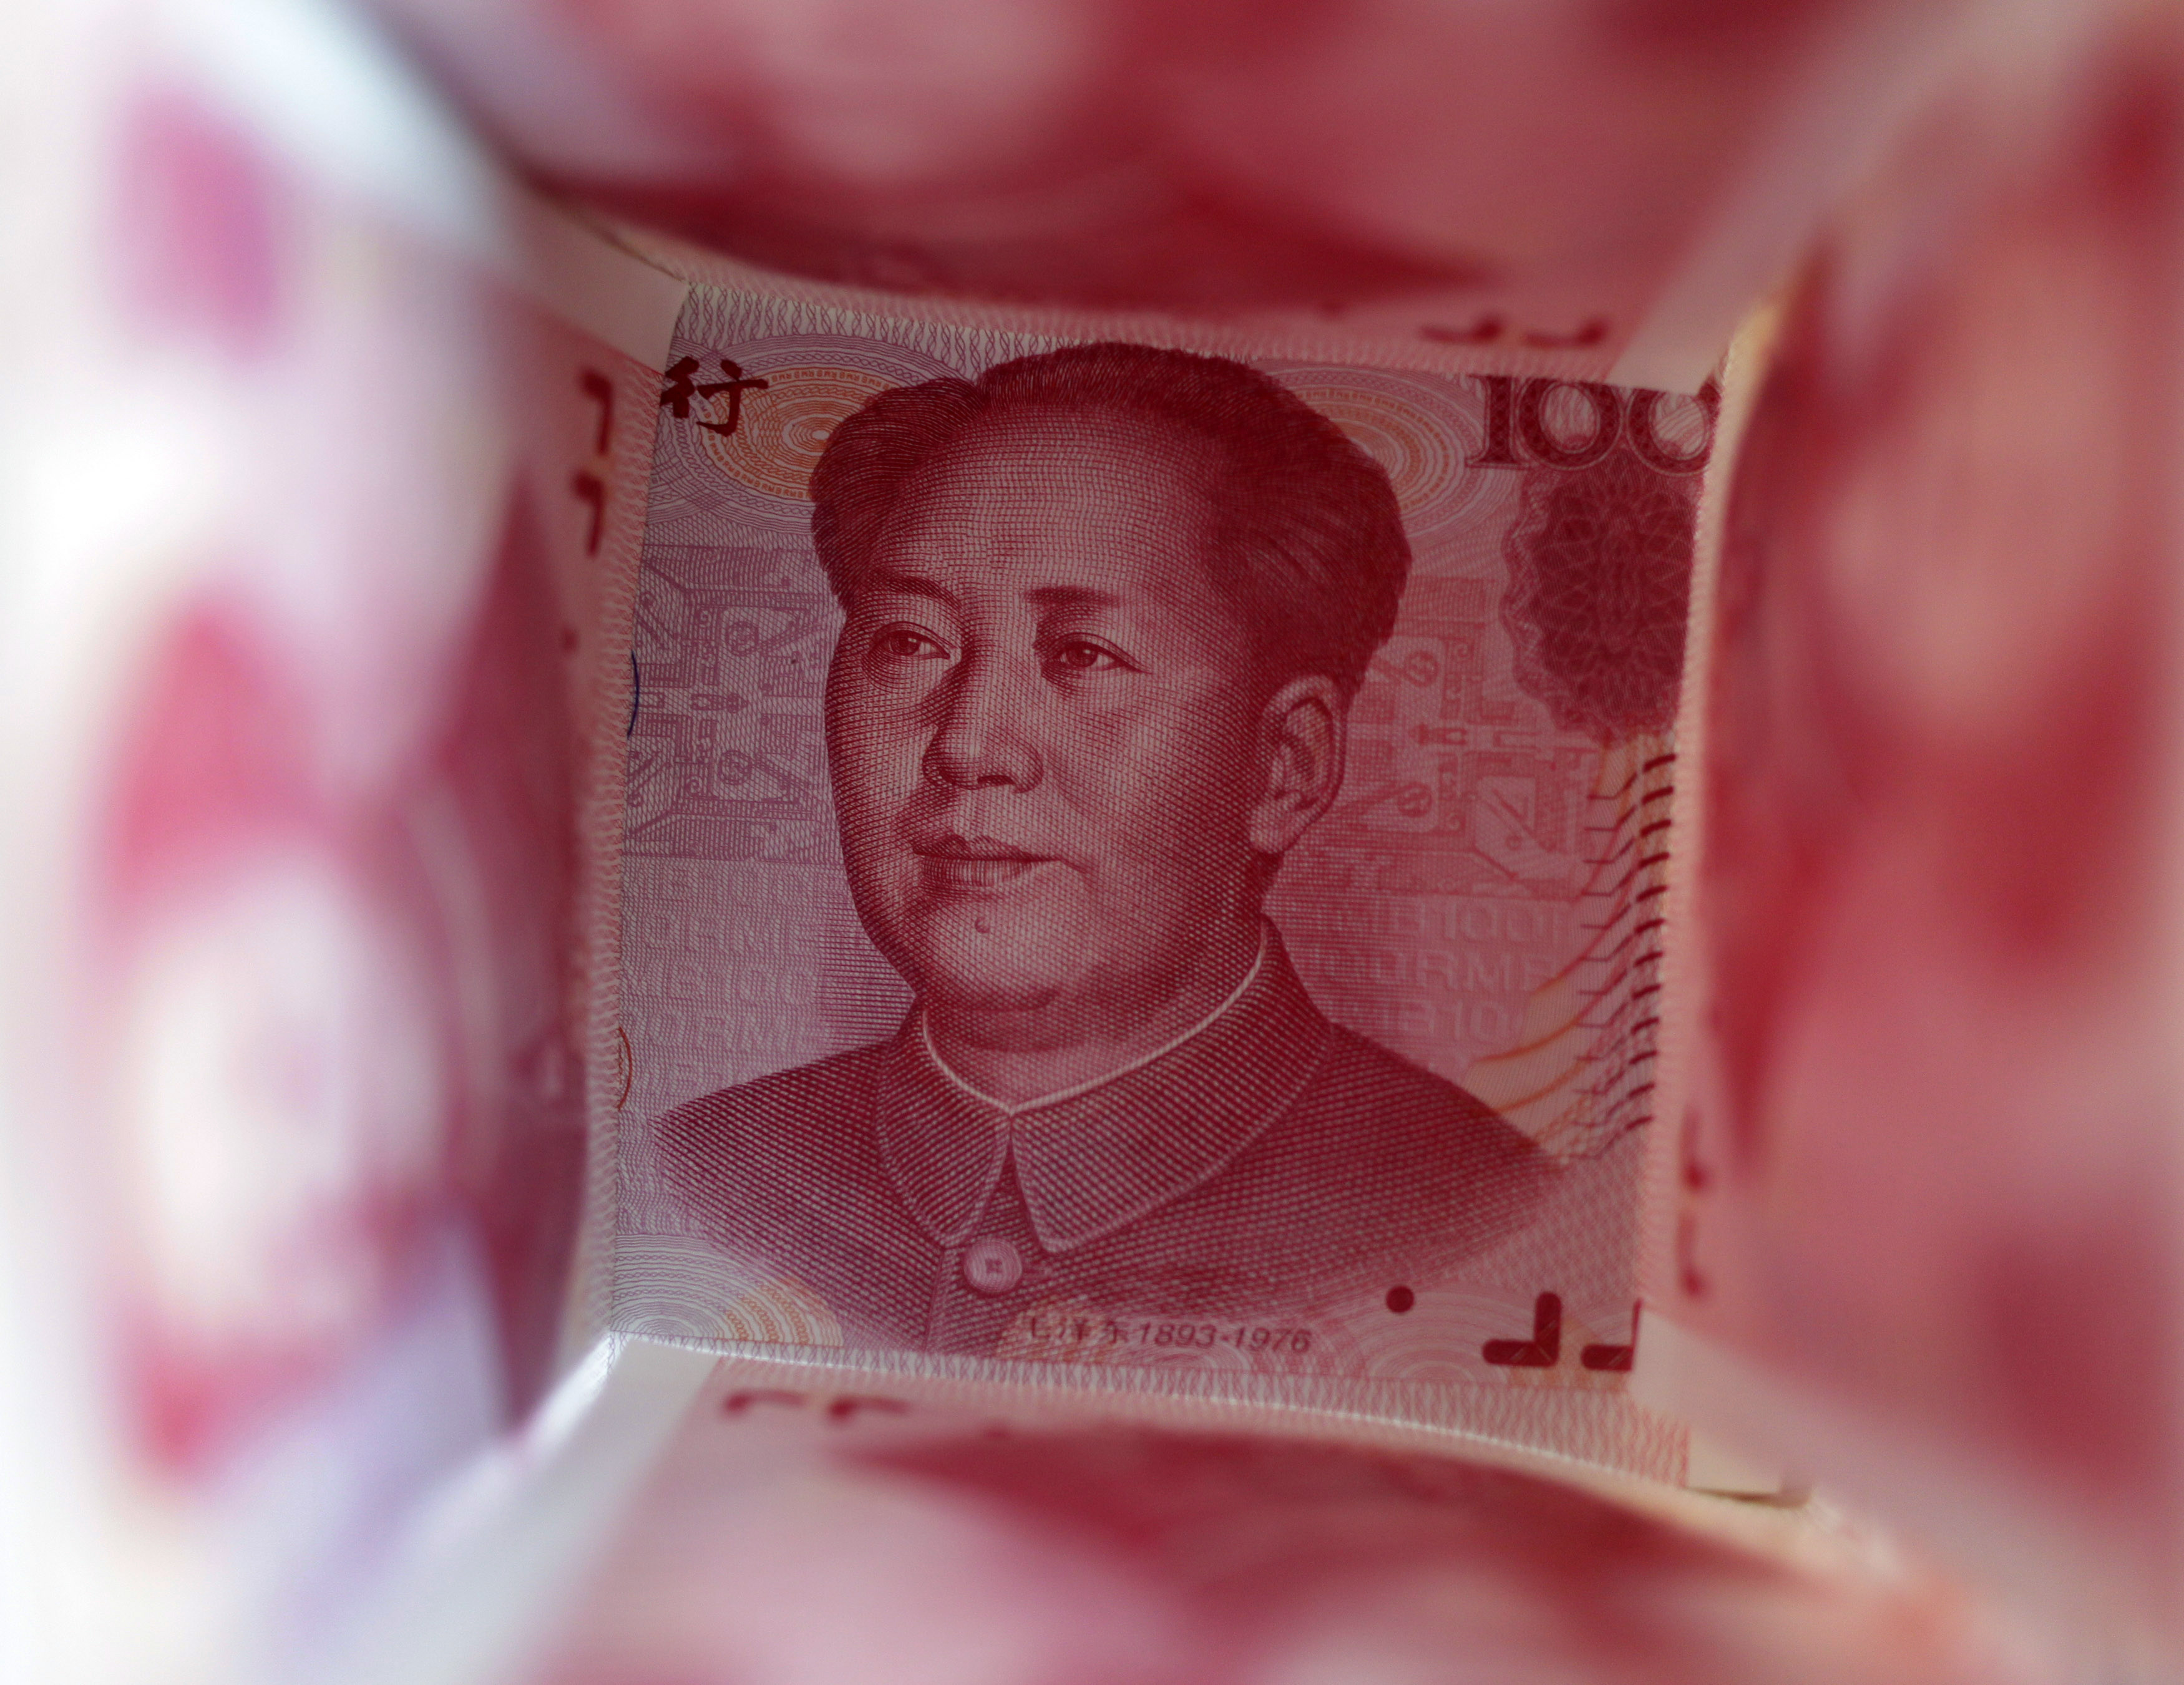 A 100 Yuan note is surrounded by other 100 Yuan notes in this picture illustration in Beijing